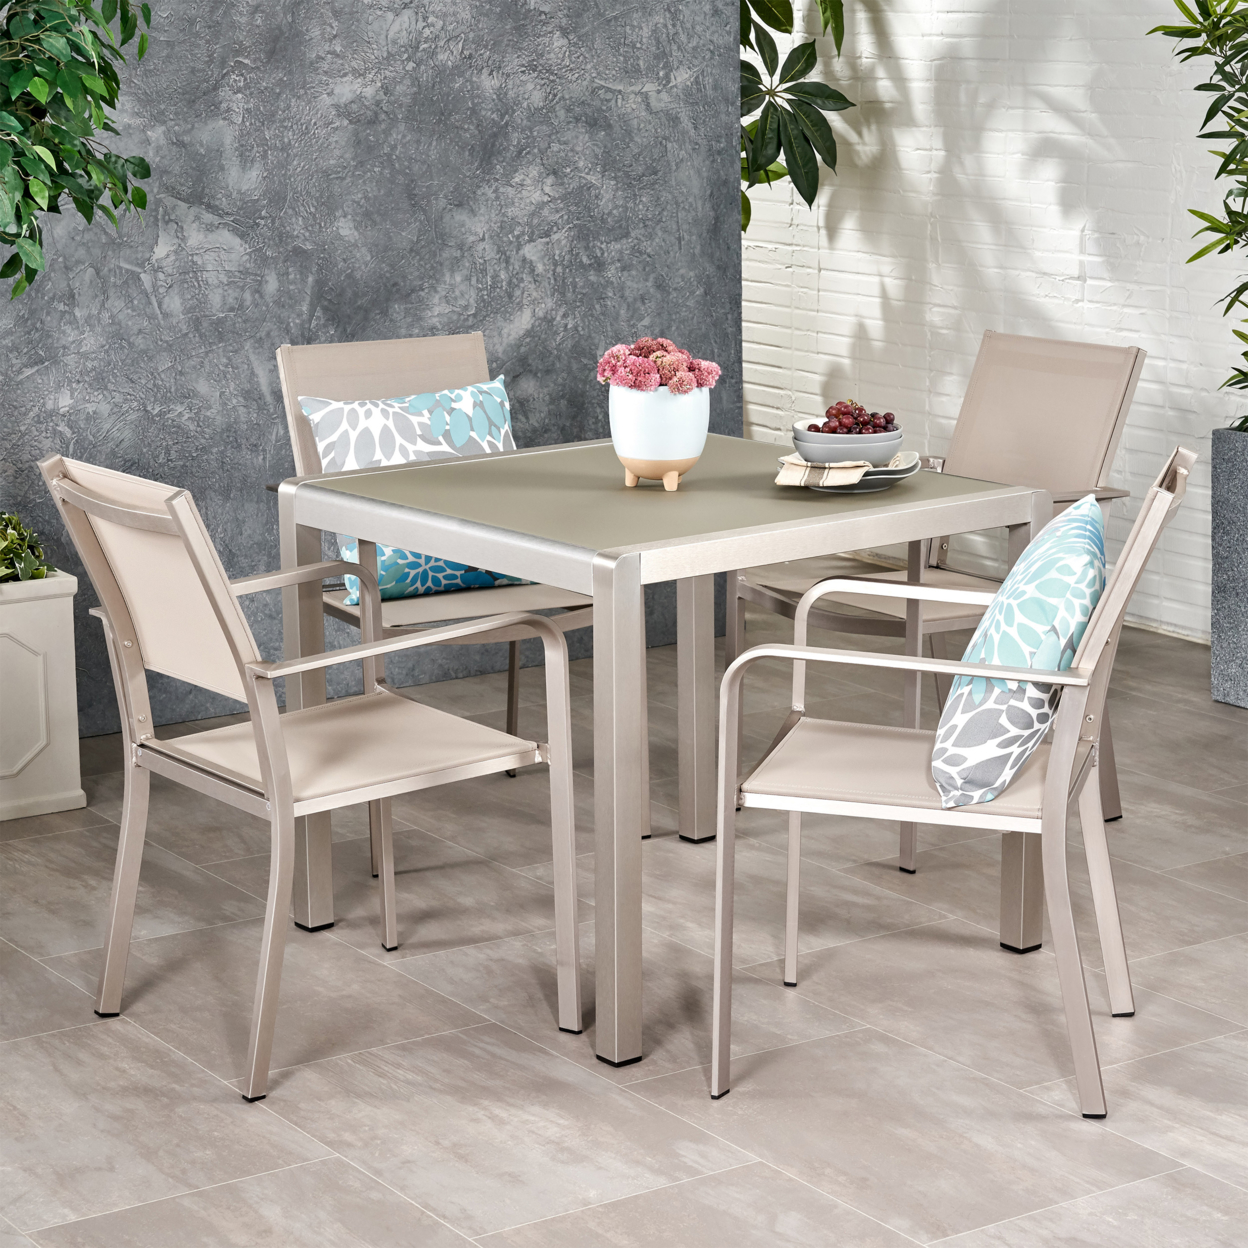 Annabelle Outdoor Modern 4 Seater Aluminum Dining Set With Faux Wood Table Top - Aluminum + Faux Rattan + Outdoor Mesh